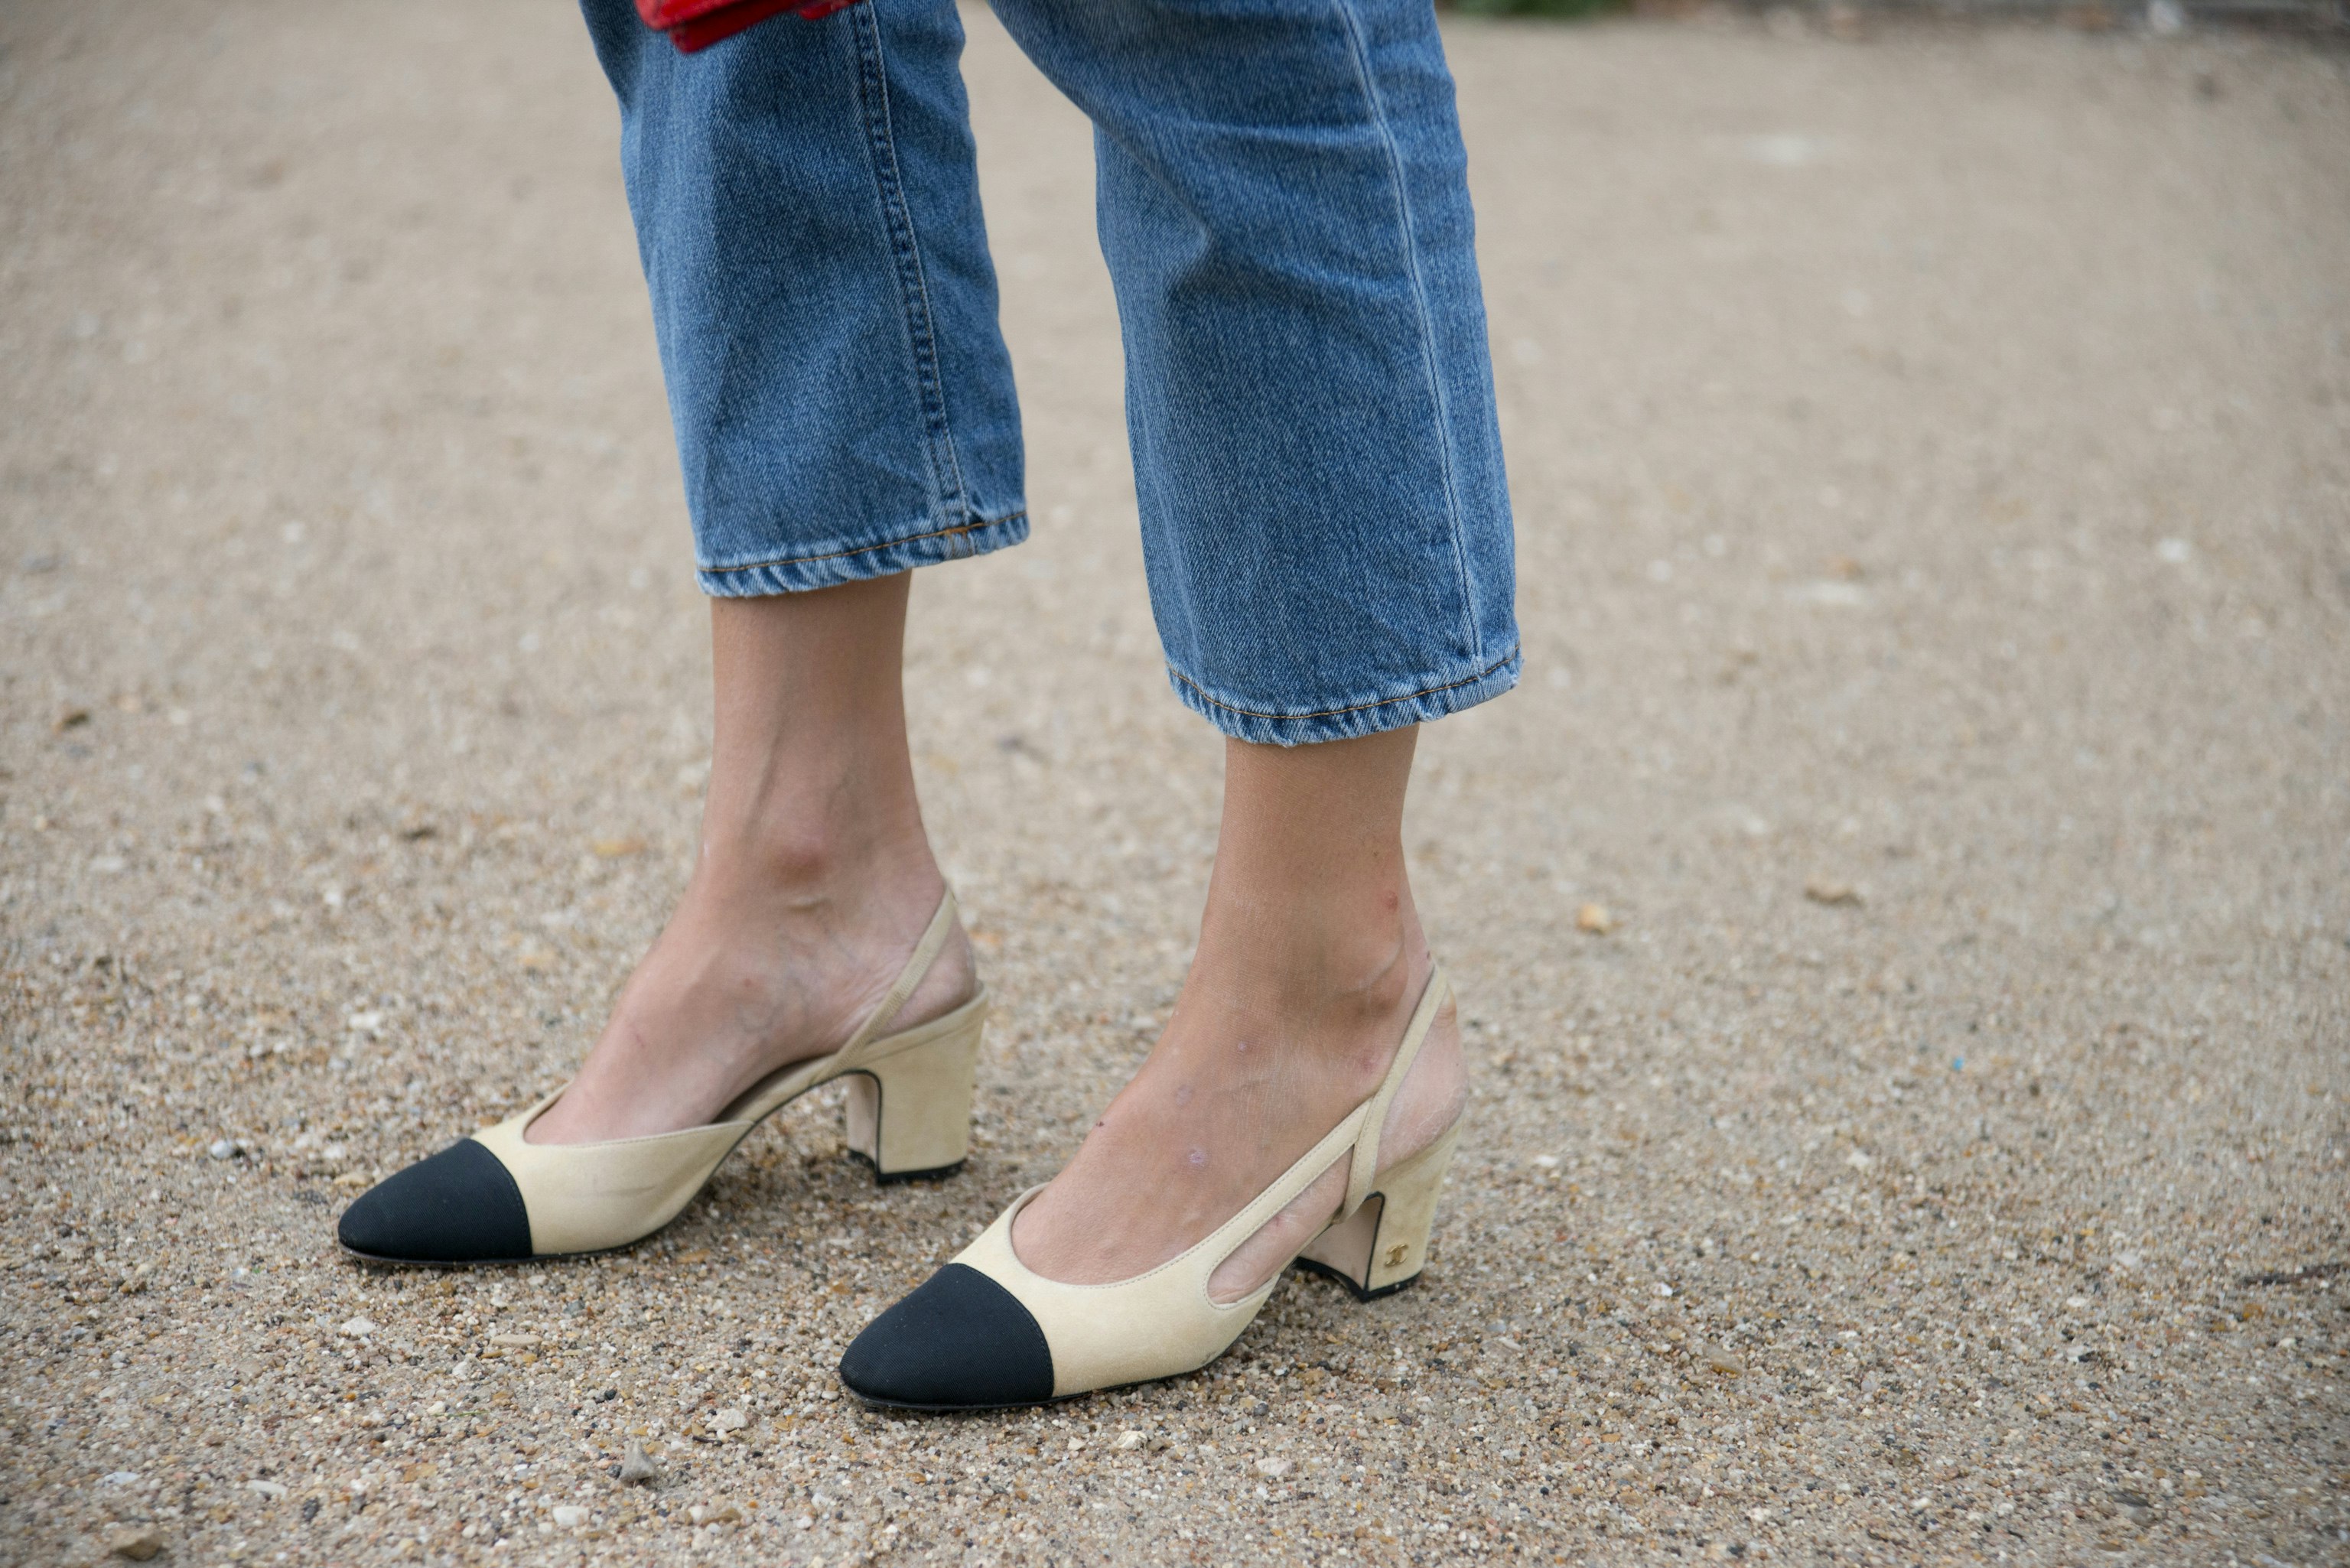 They are Wearing Chanel Granny Slingbacks – Fashion Trends and